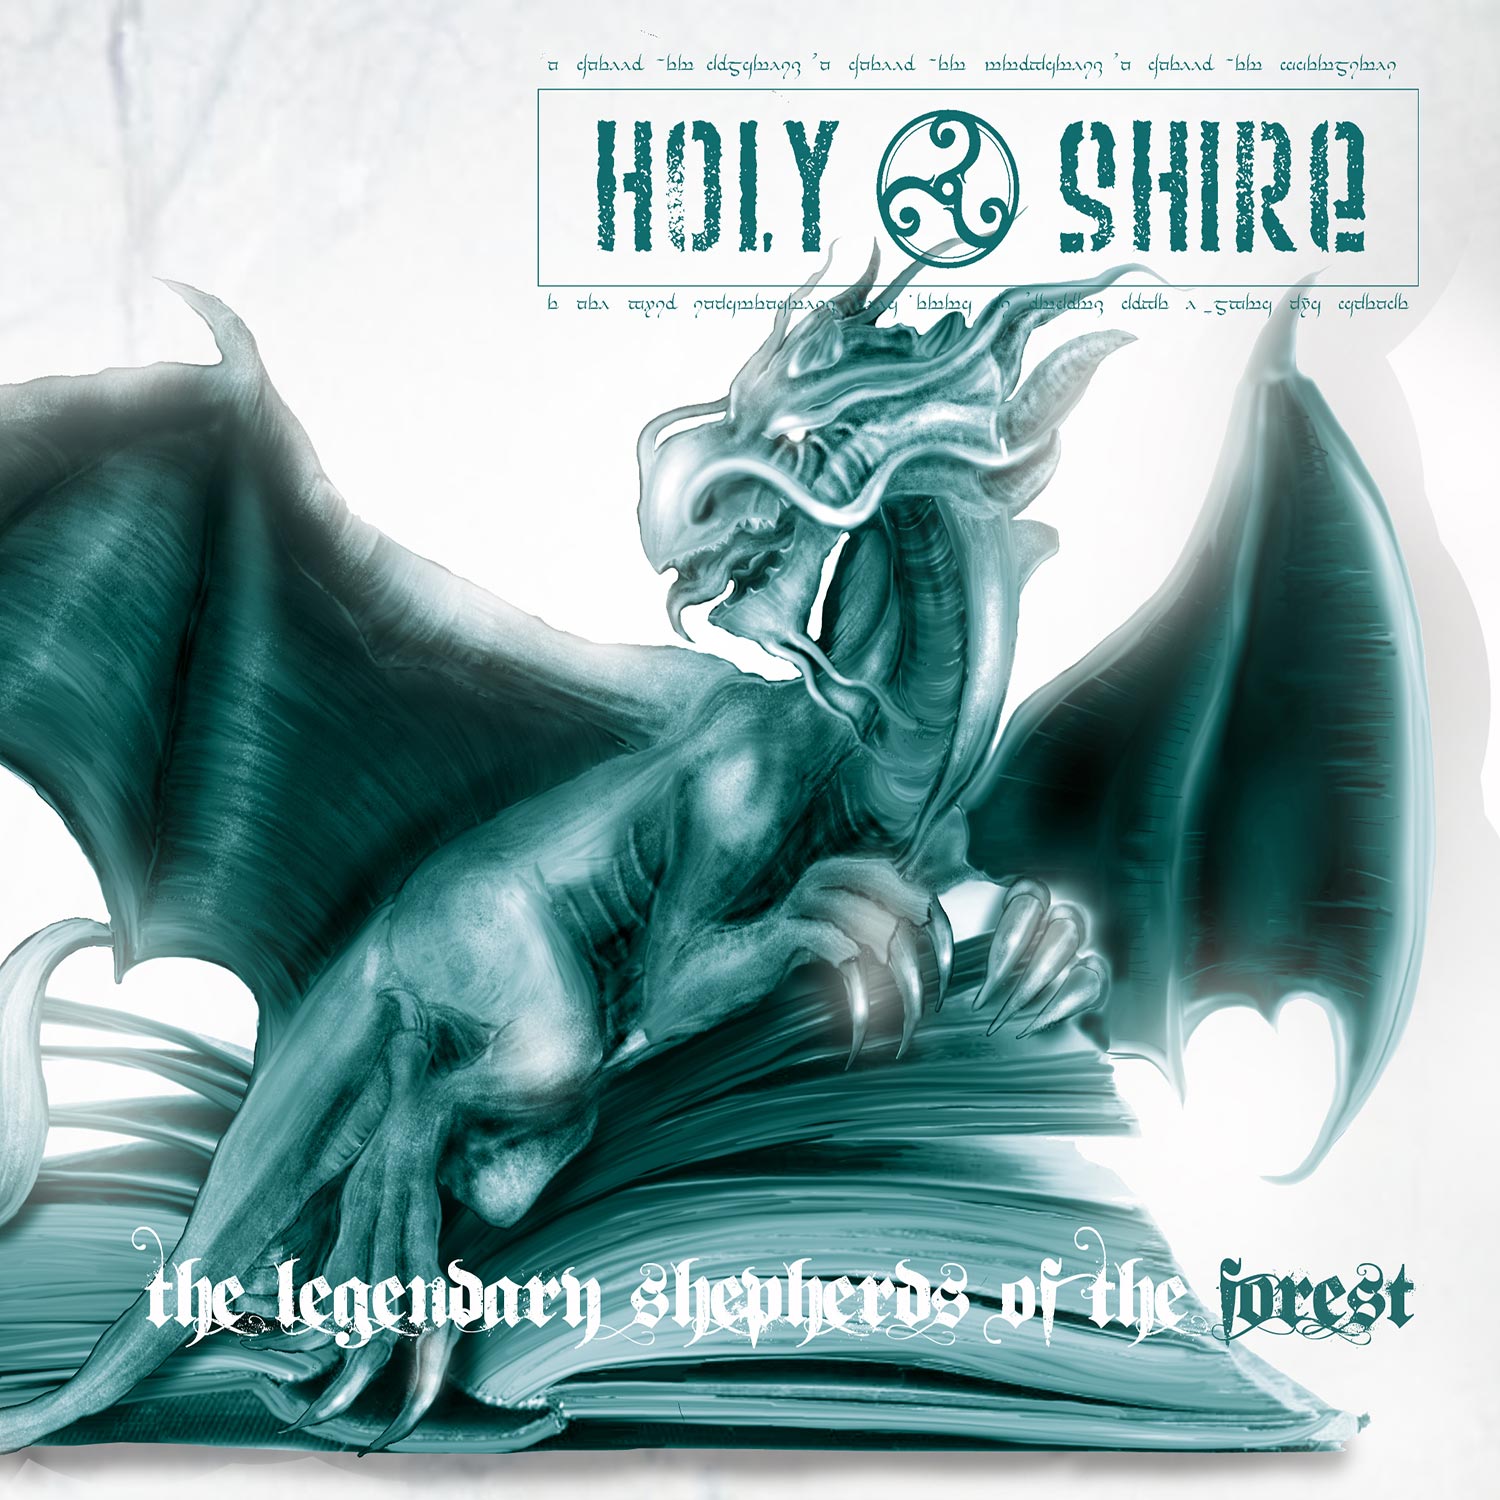 Holy Shire – “The Legendary Shepherds of the Forest”